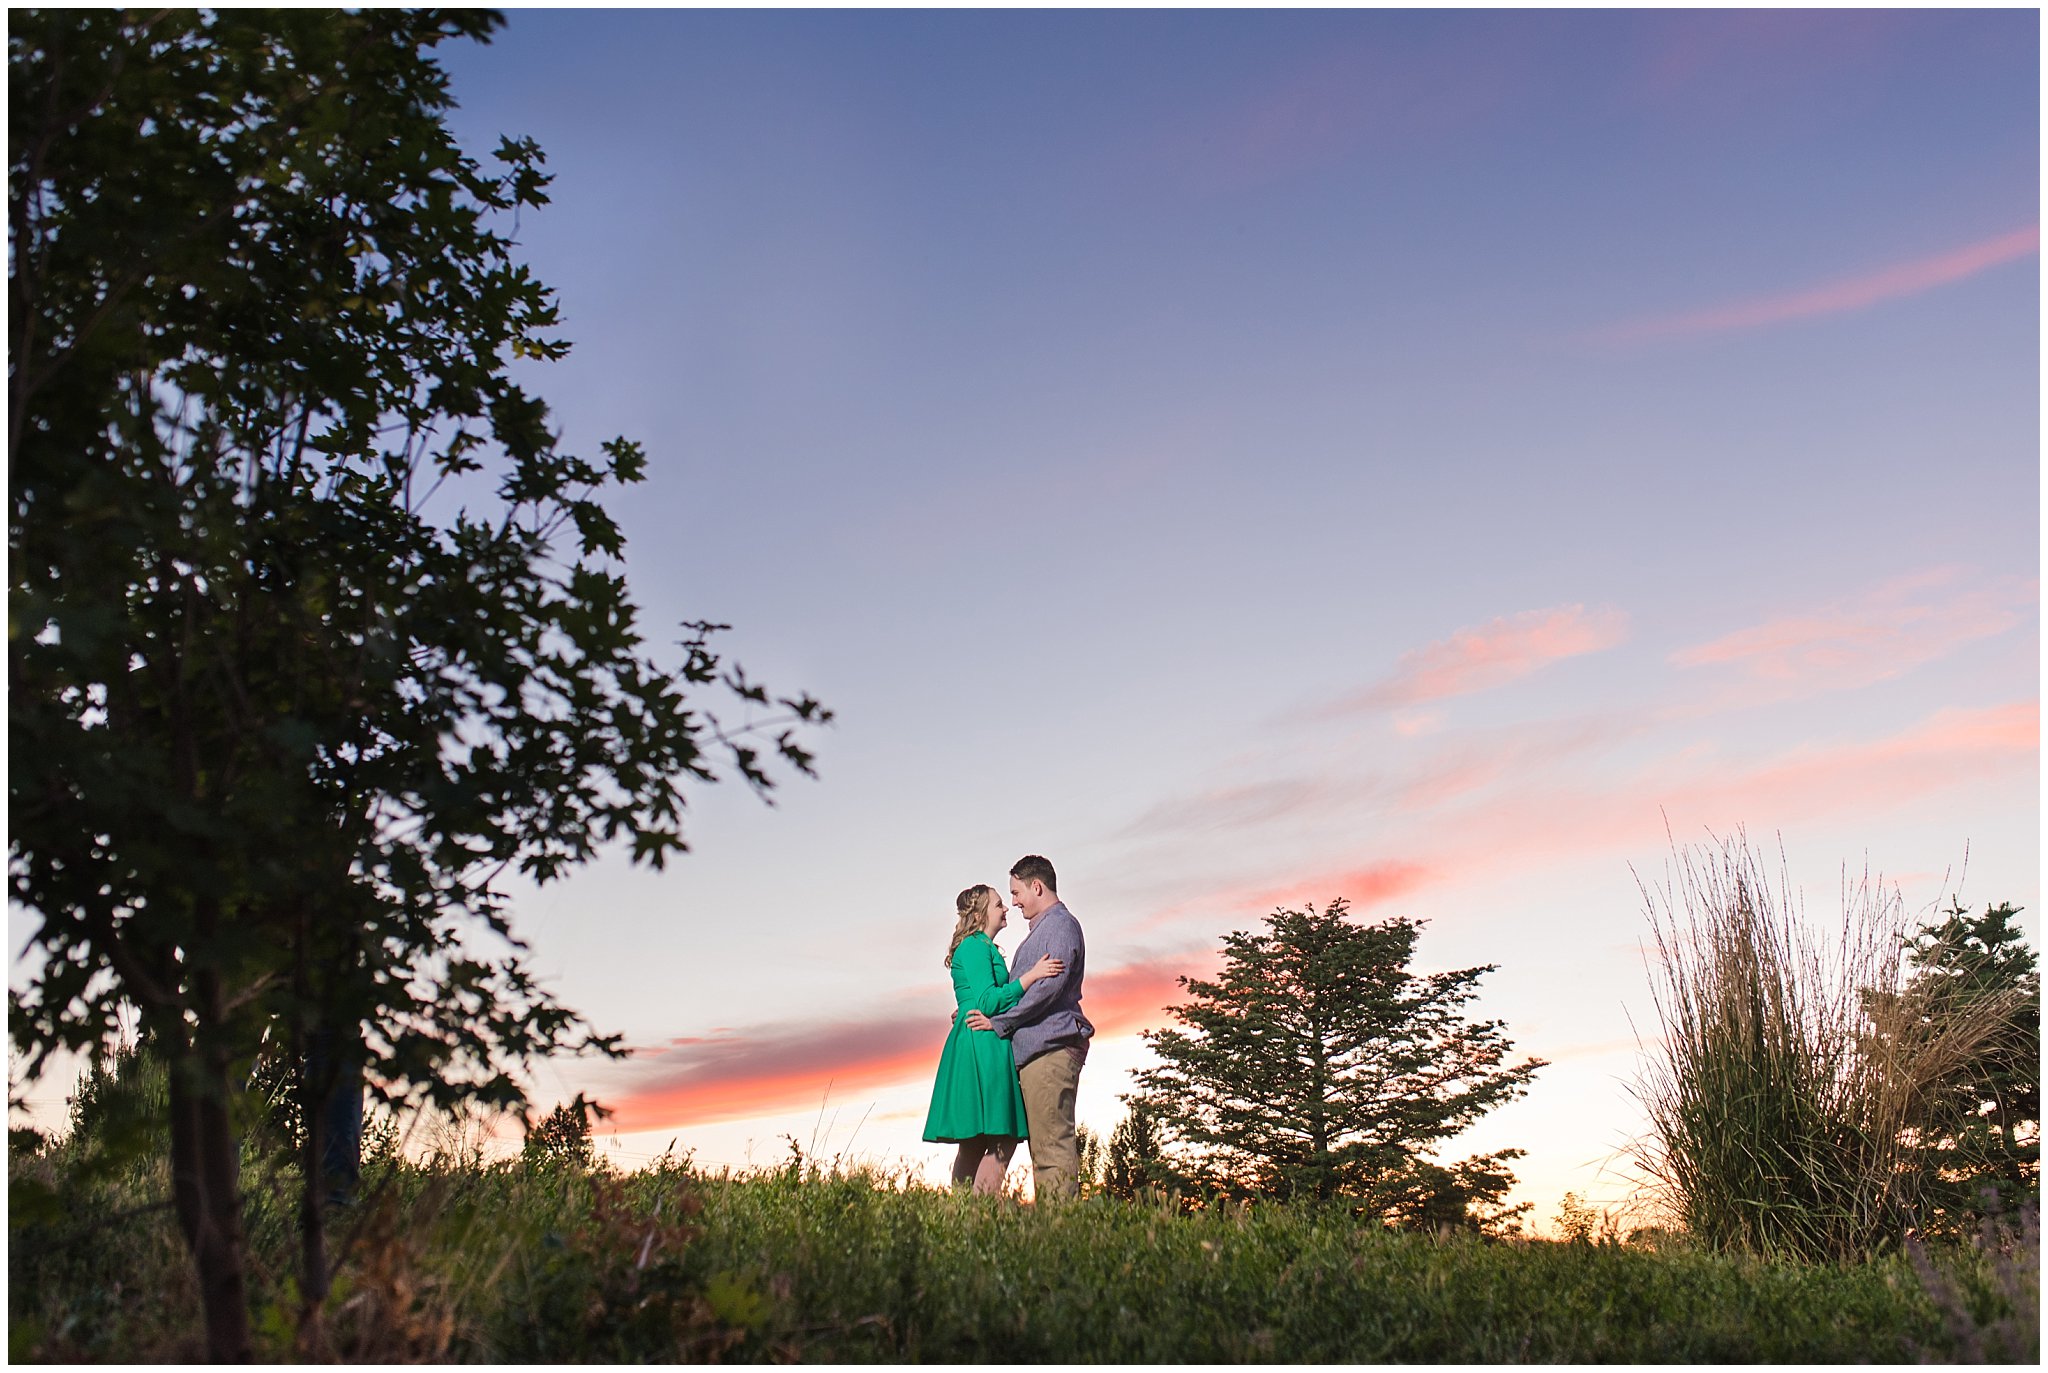 Couple at sunset in a garden for their engagement session with a vintage 1950s dress | Summer USU Botanical Garden Engagement Session | Jessie and Dallin Photography